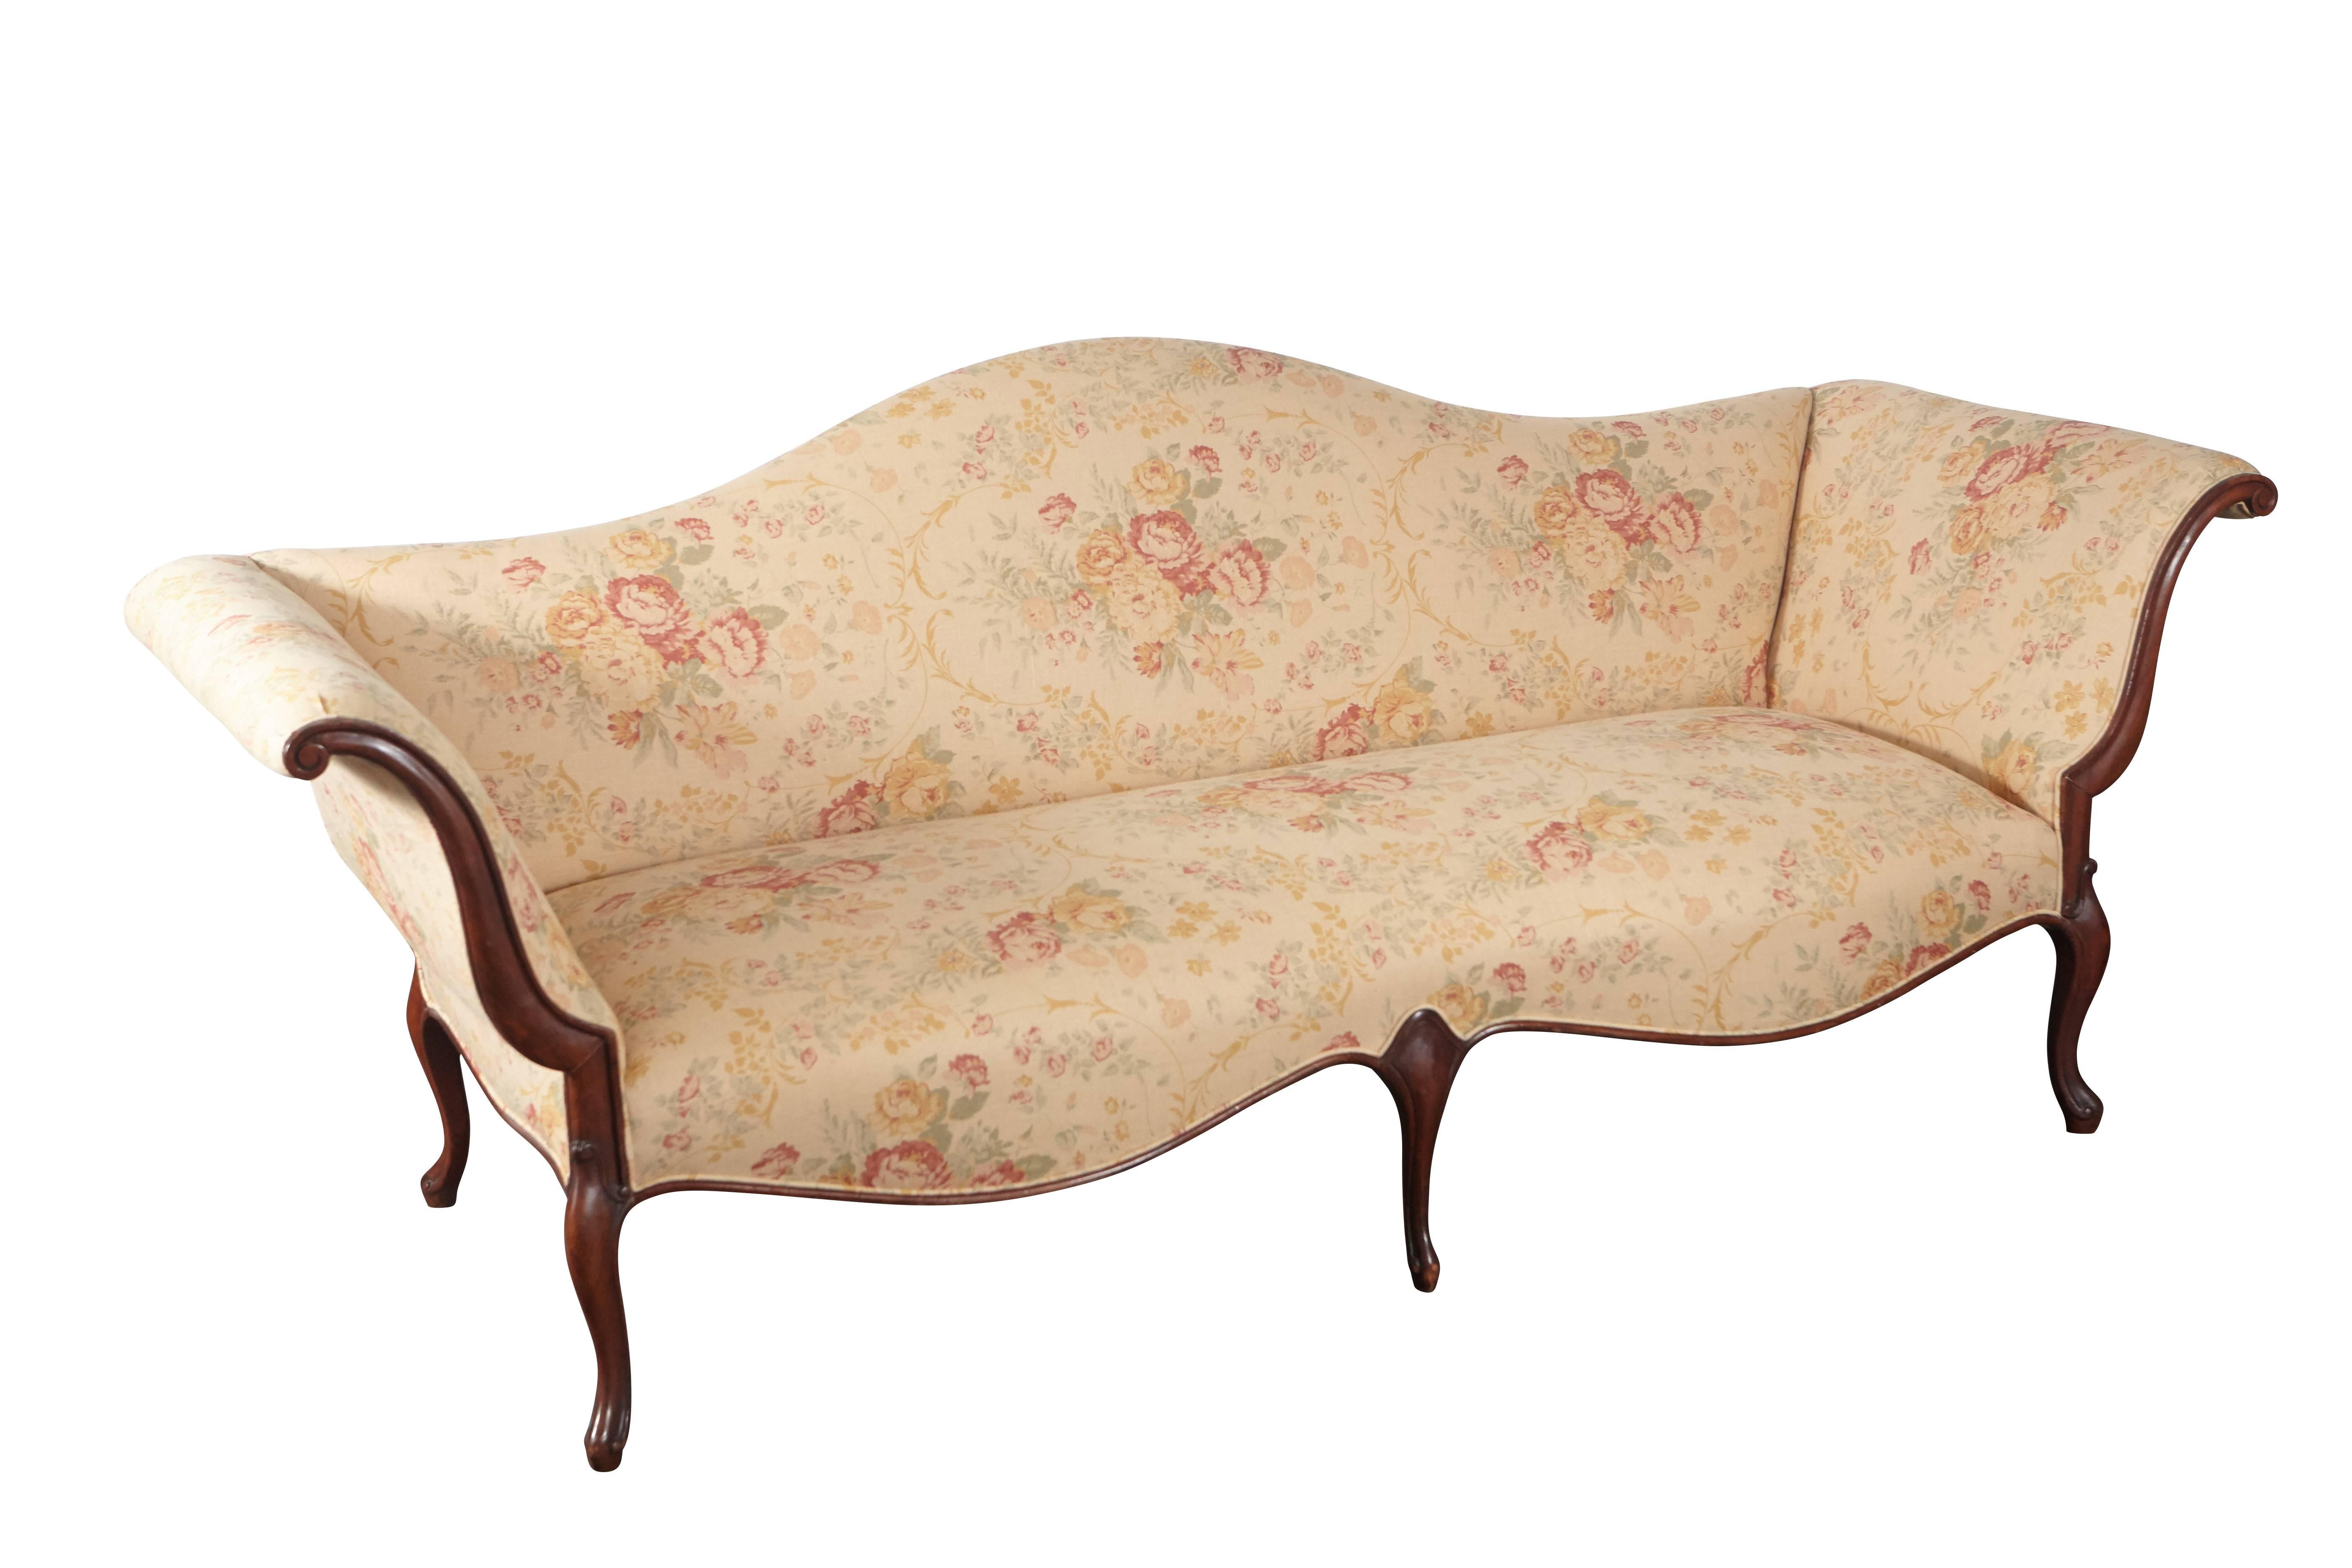 This wonderful canapé is of exceptional size with elegantly shaped bones that create a breathtaking view from any angle. The piece has been newly upholstered in linen floral fabric. The arms have a uniquely beautiful shape, opening to the seat in on